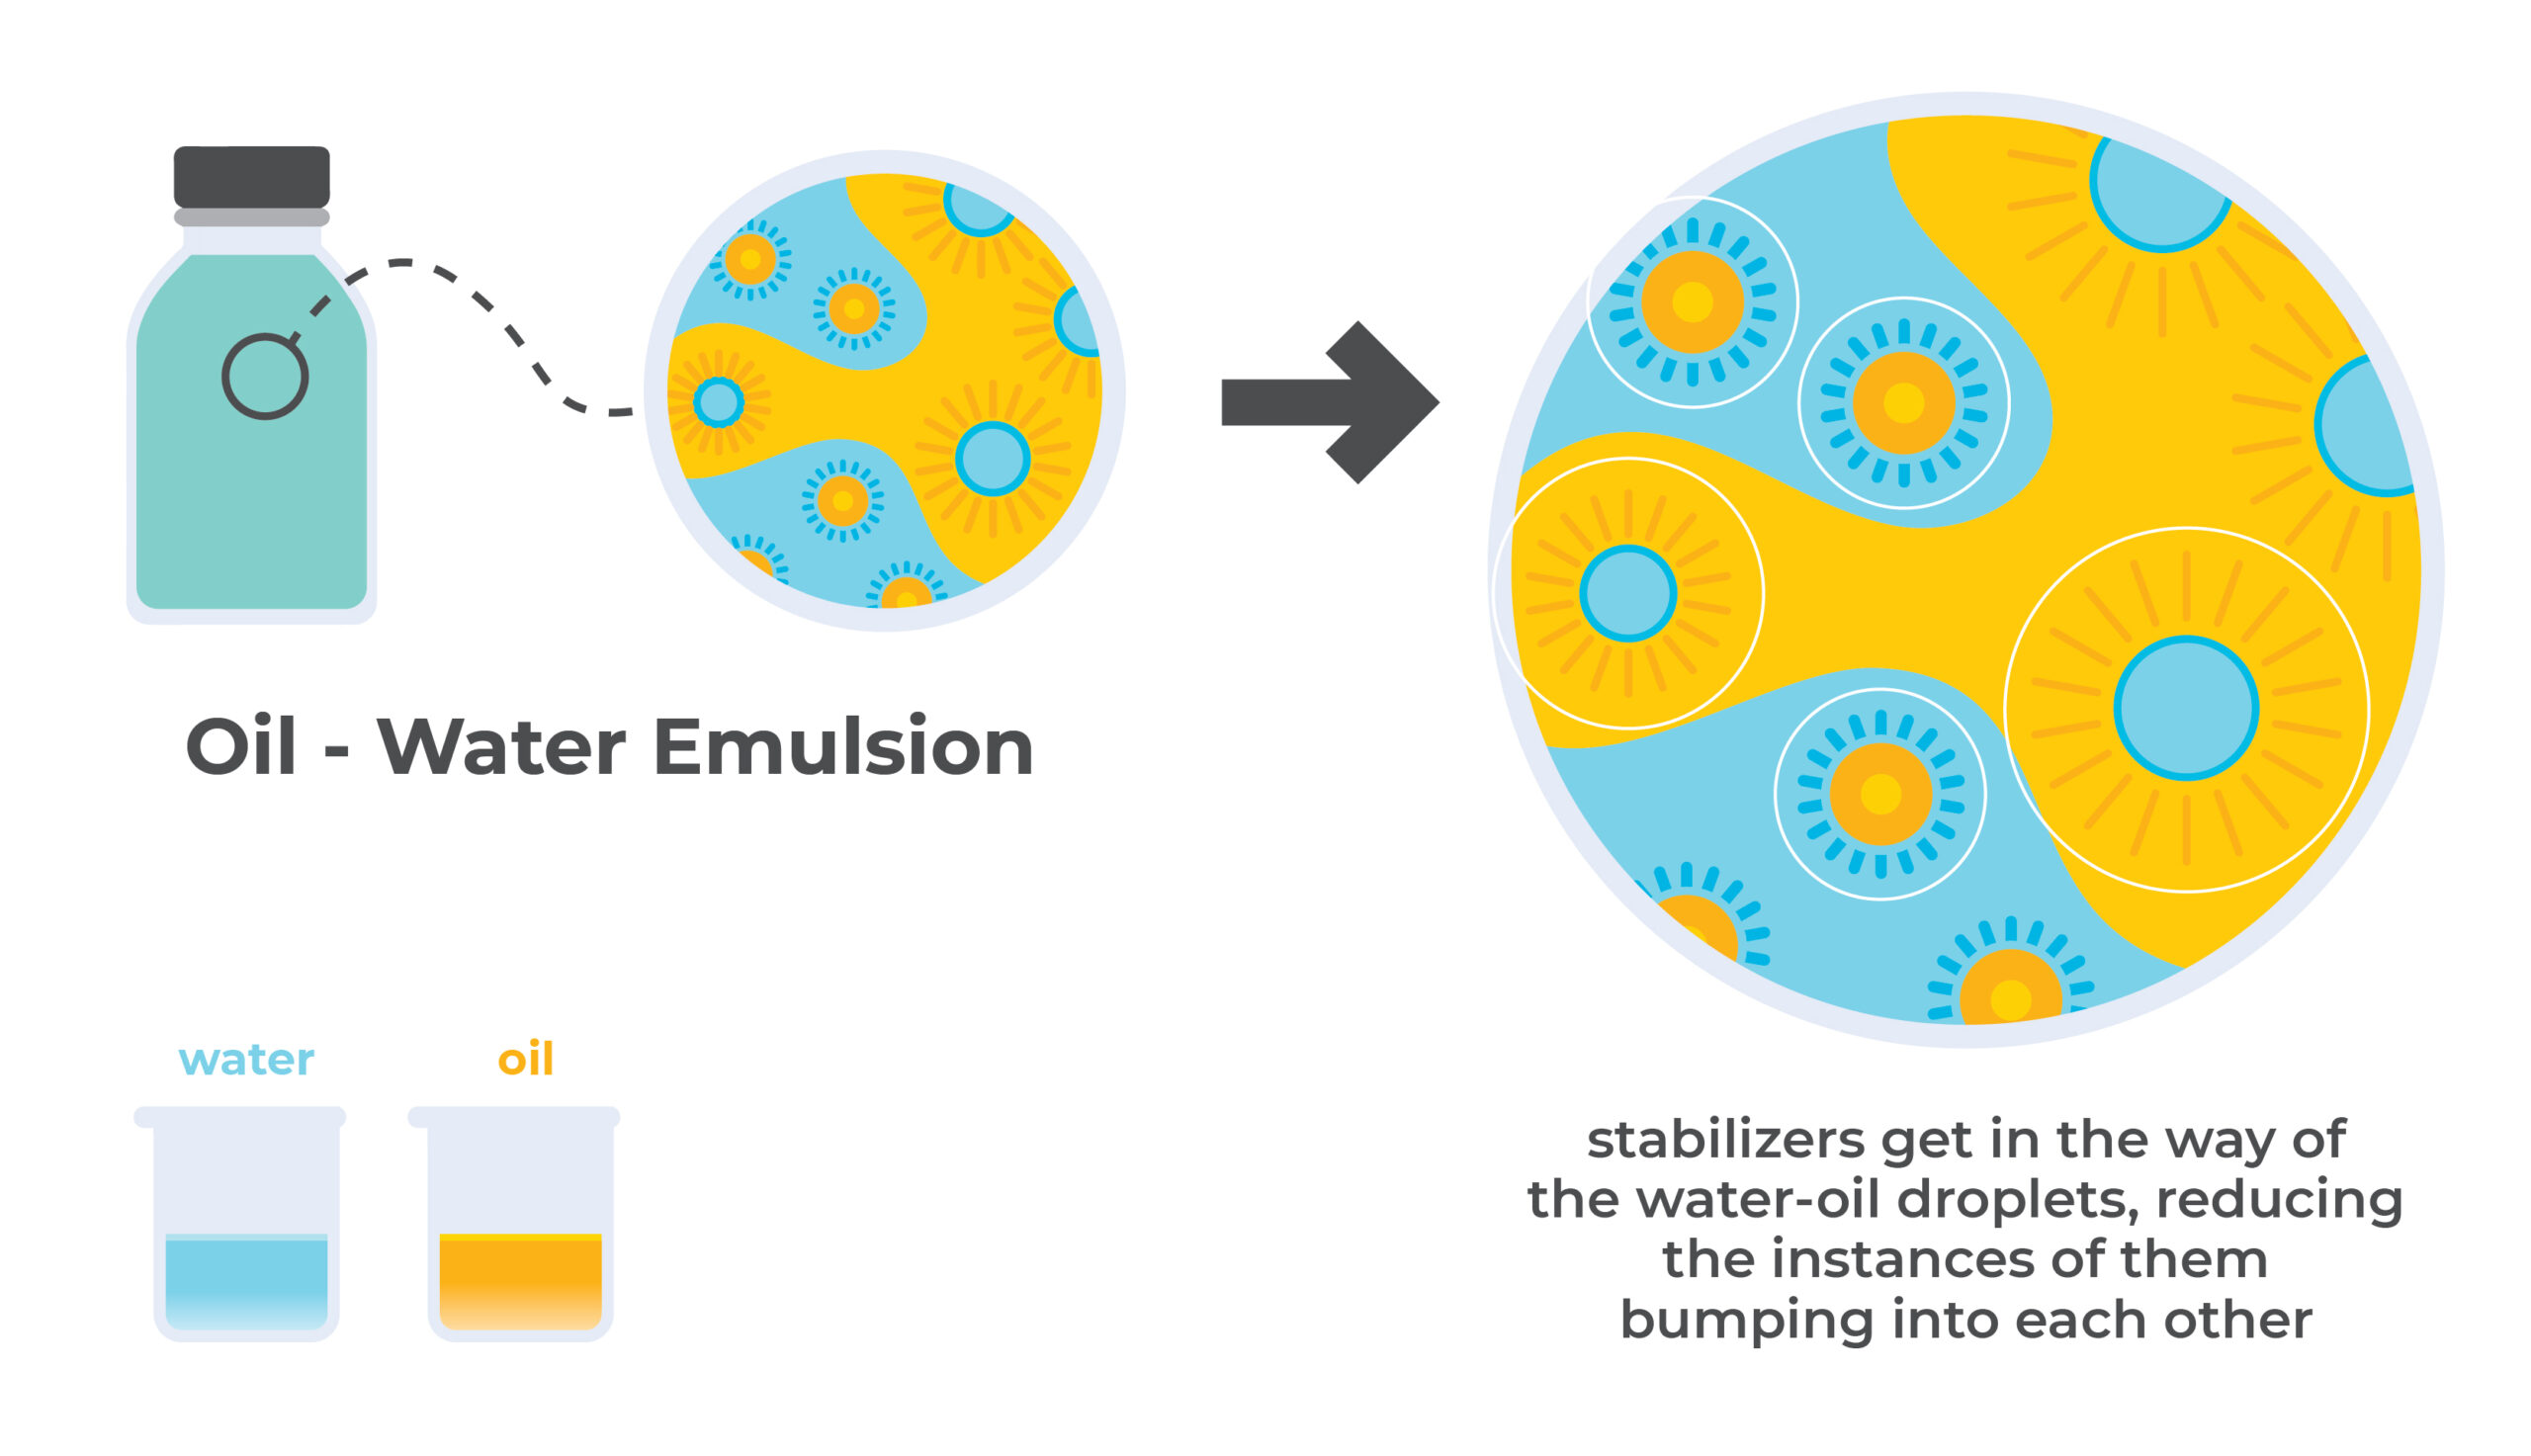 The many applications of emulsifiers and stabilizers: how they work in the  products around us - Musim Mas